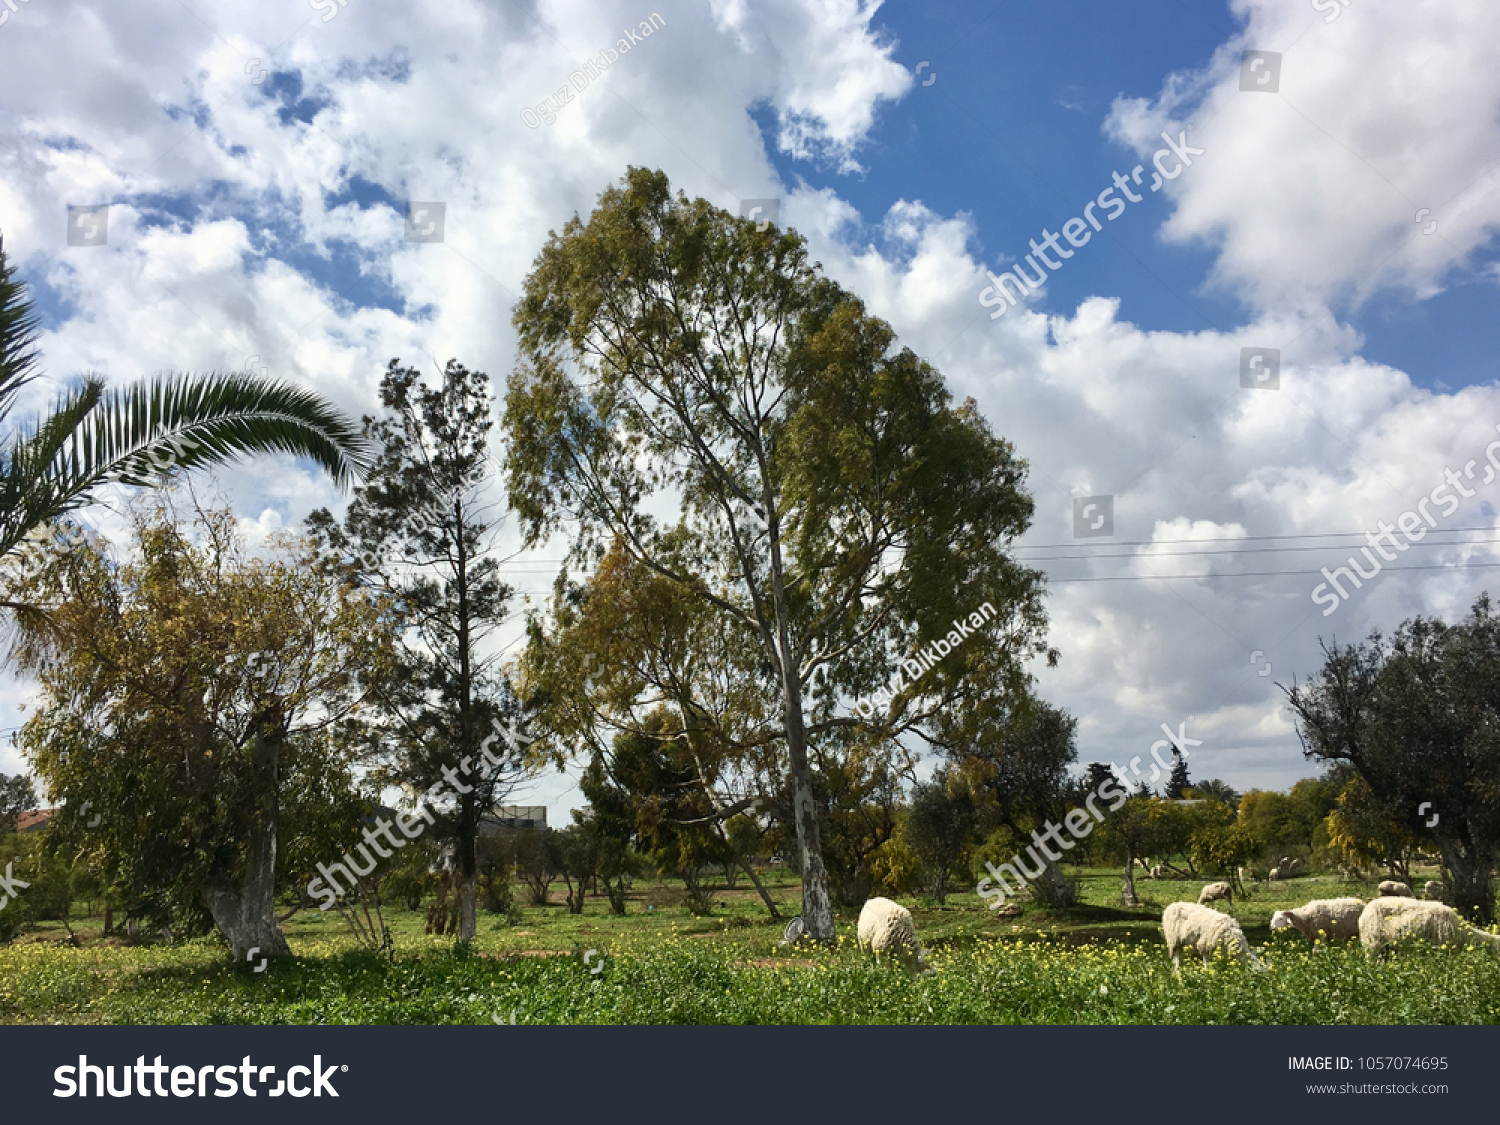 flock of sheep, yearning and goats on spring green grass #1057074695